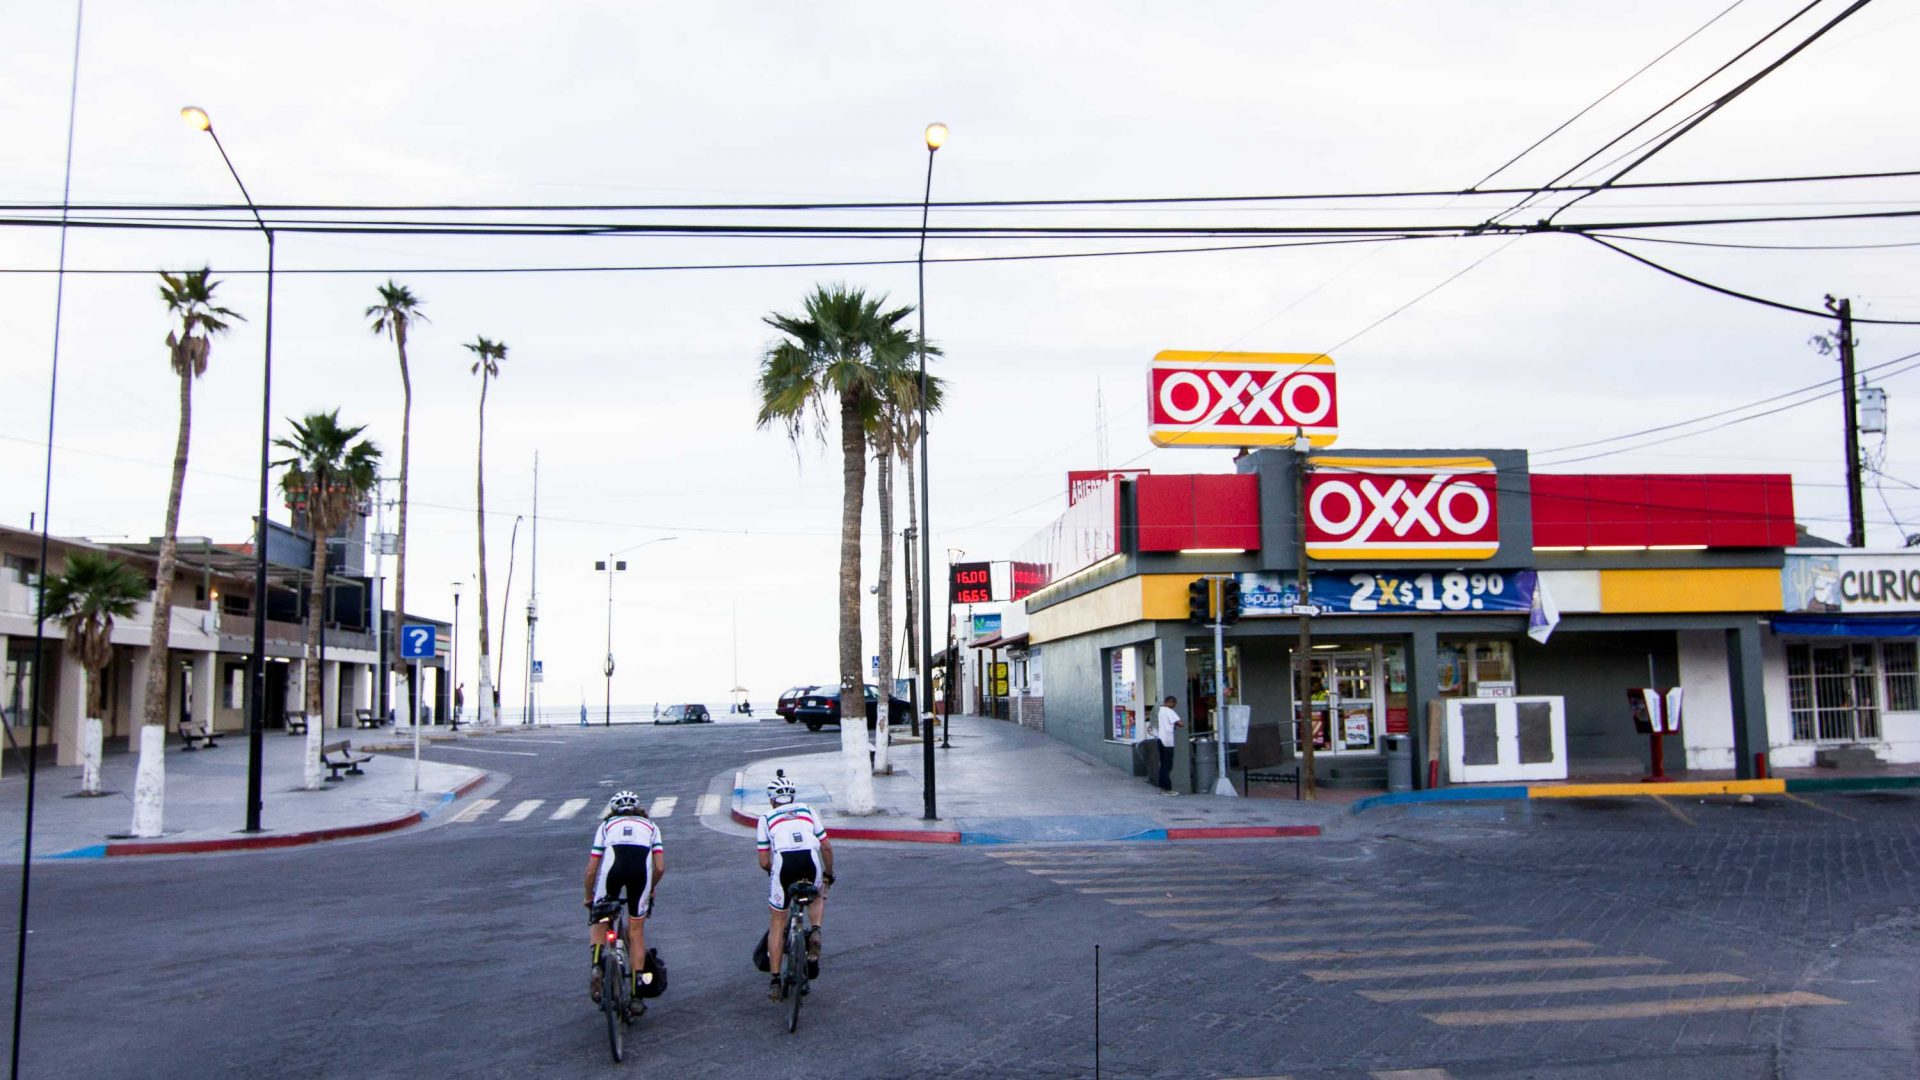 Two people cycle along the tarmac road through a town with a red and white restaurant to the right.